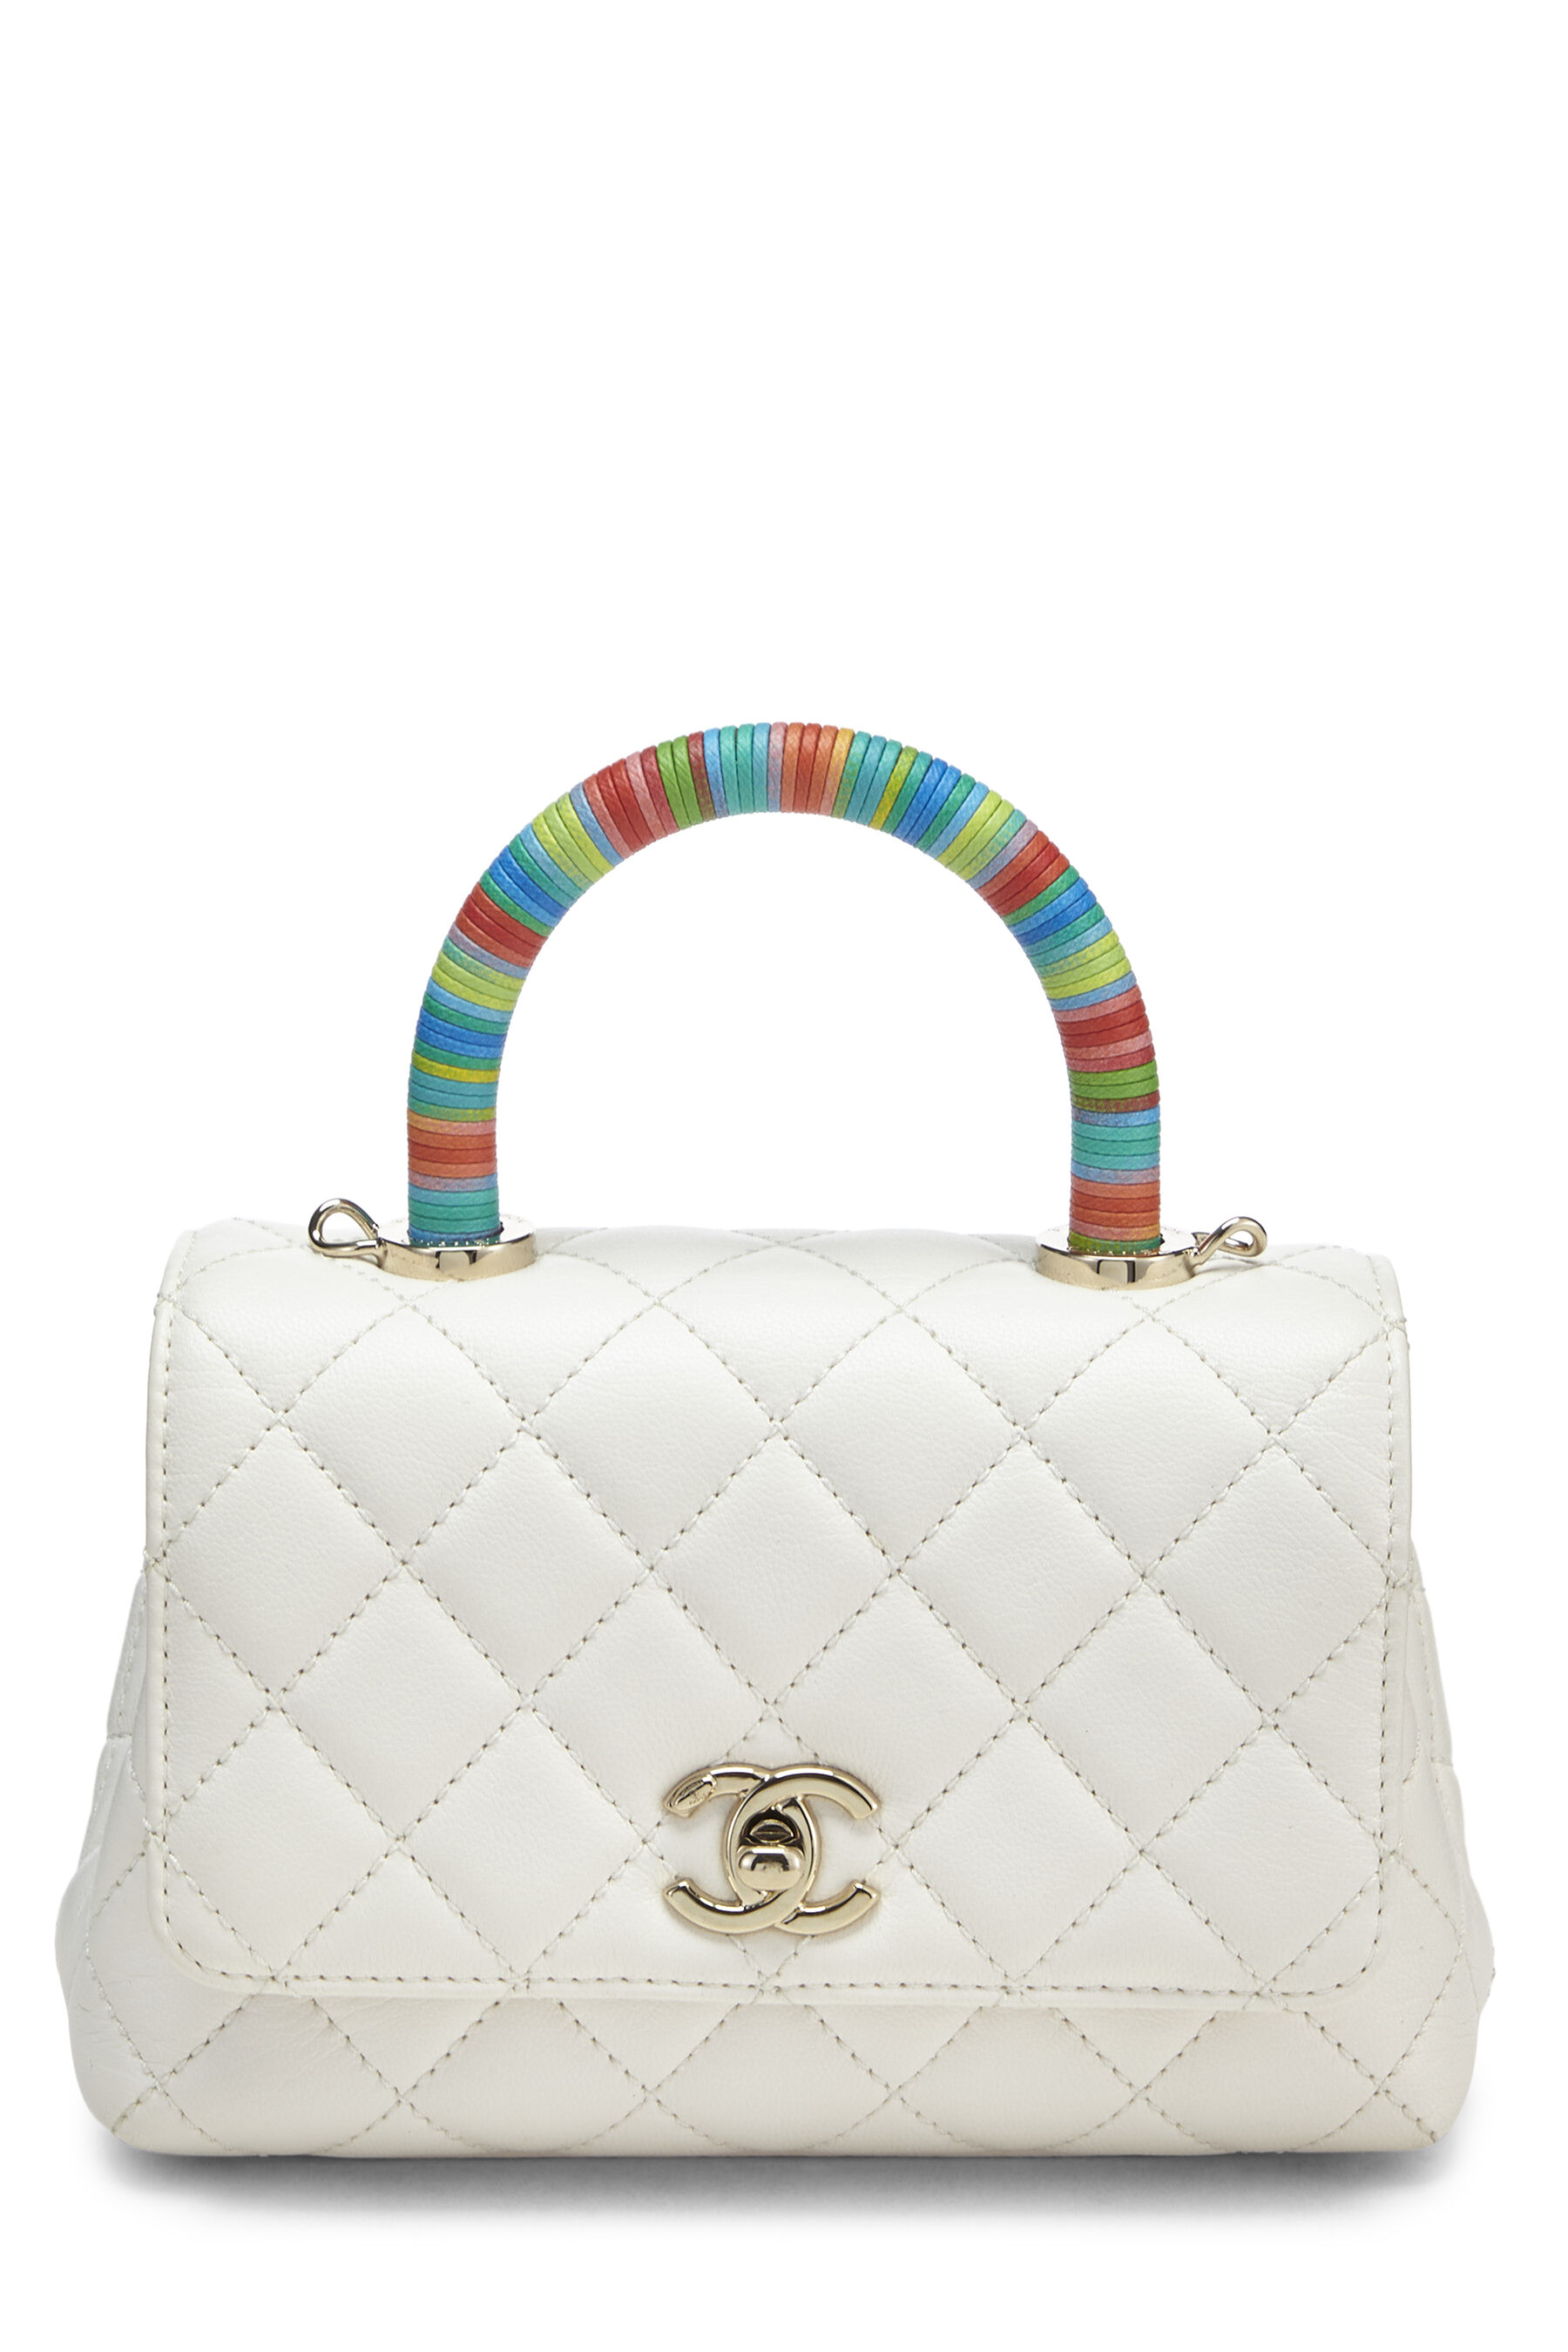 Chanel - White Quilted Lambskin Rainbow Coco Handle Bag Mini